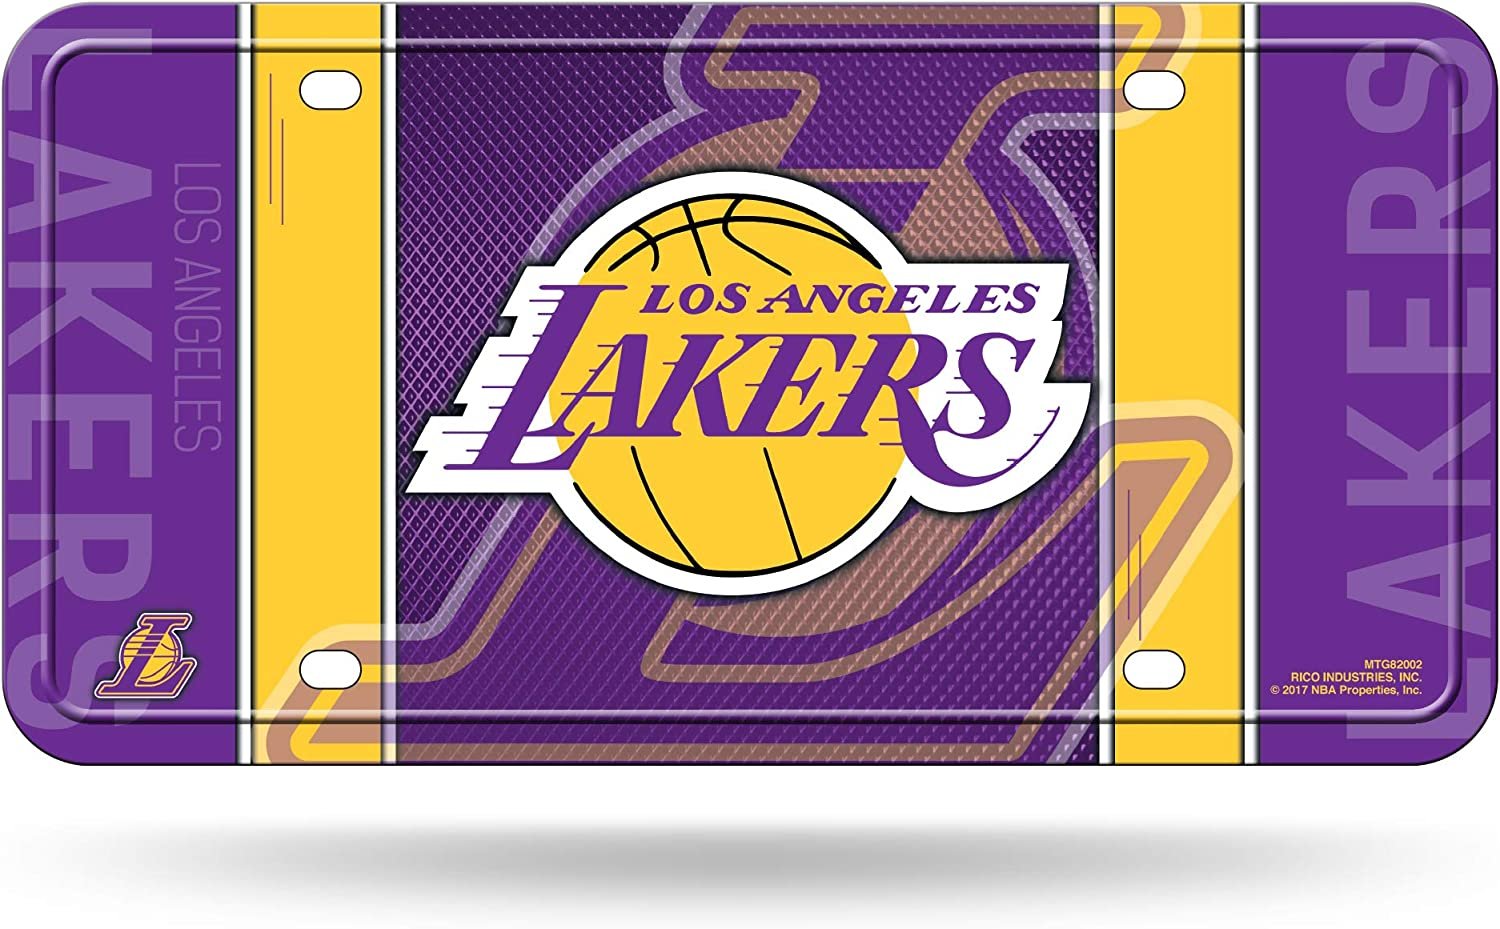 Los Angeles Lakers Metal Tag License Plate Novelty 12x6 Inch Jersey Design